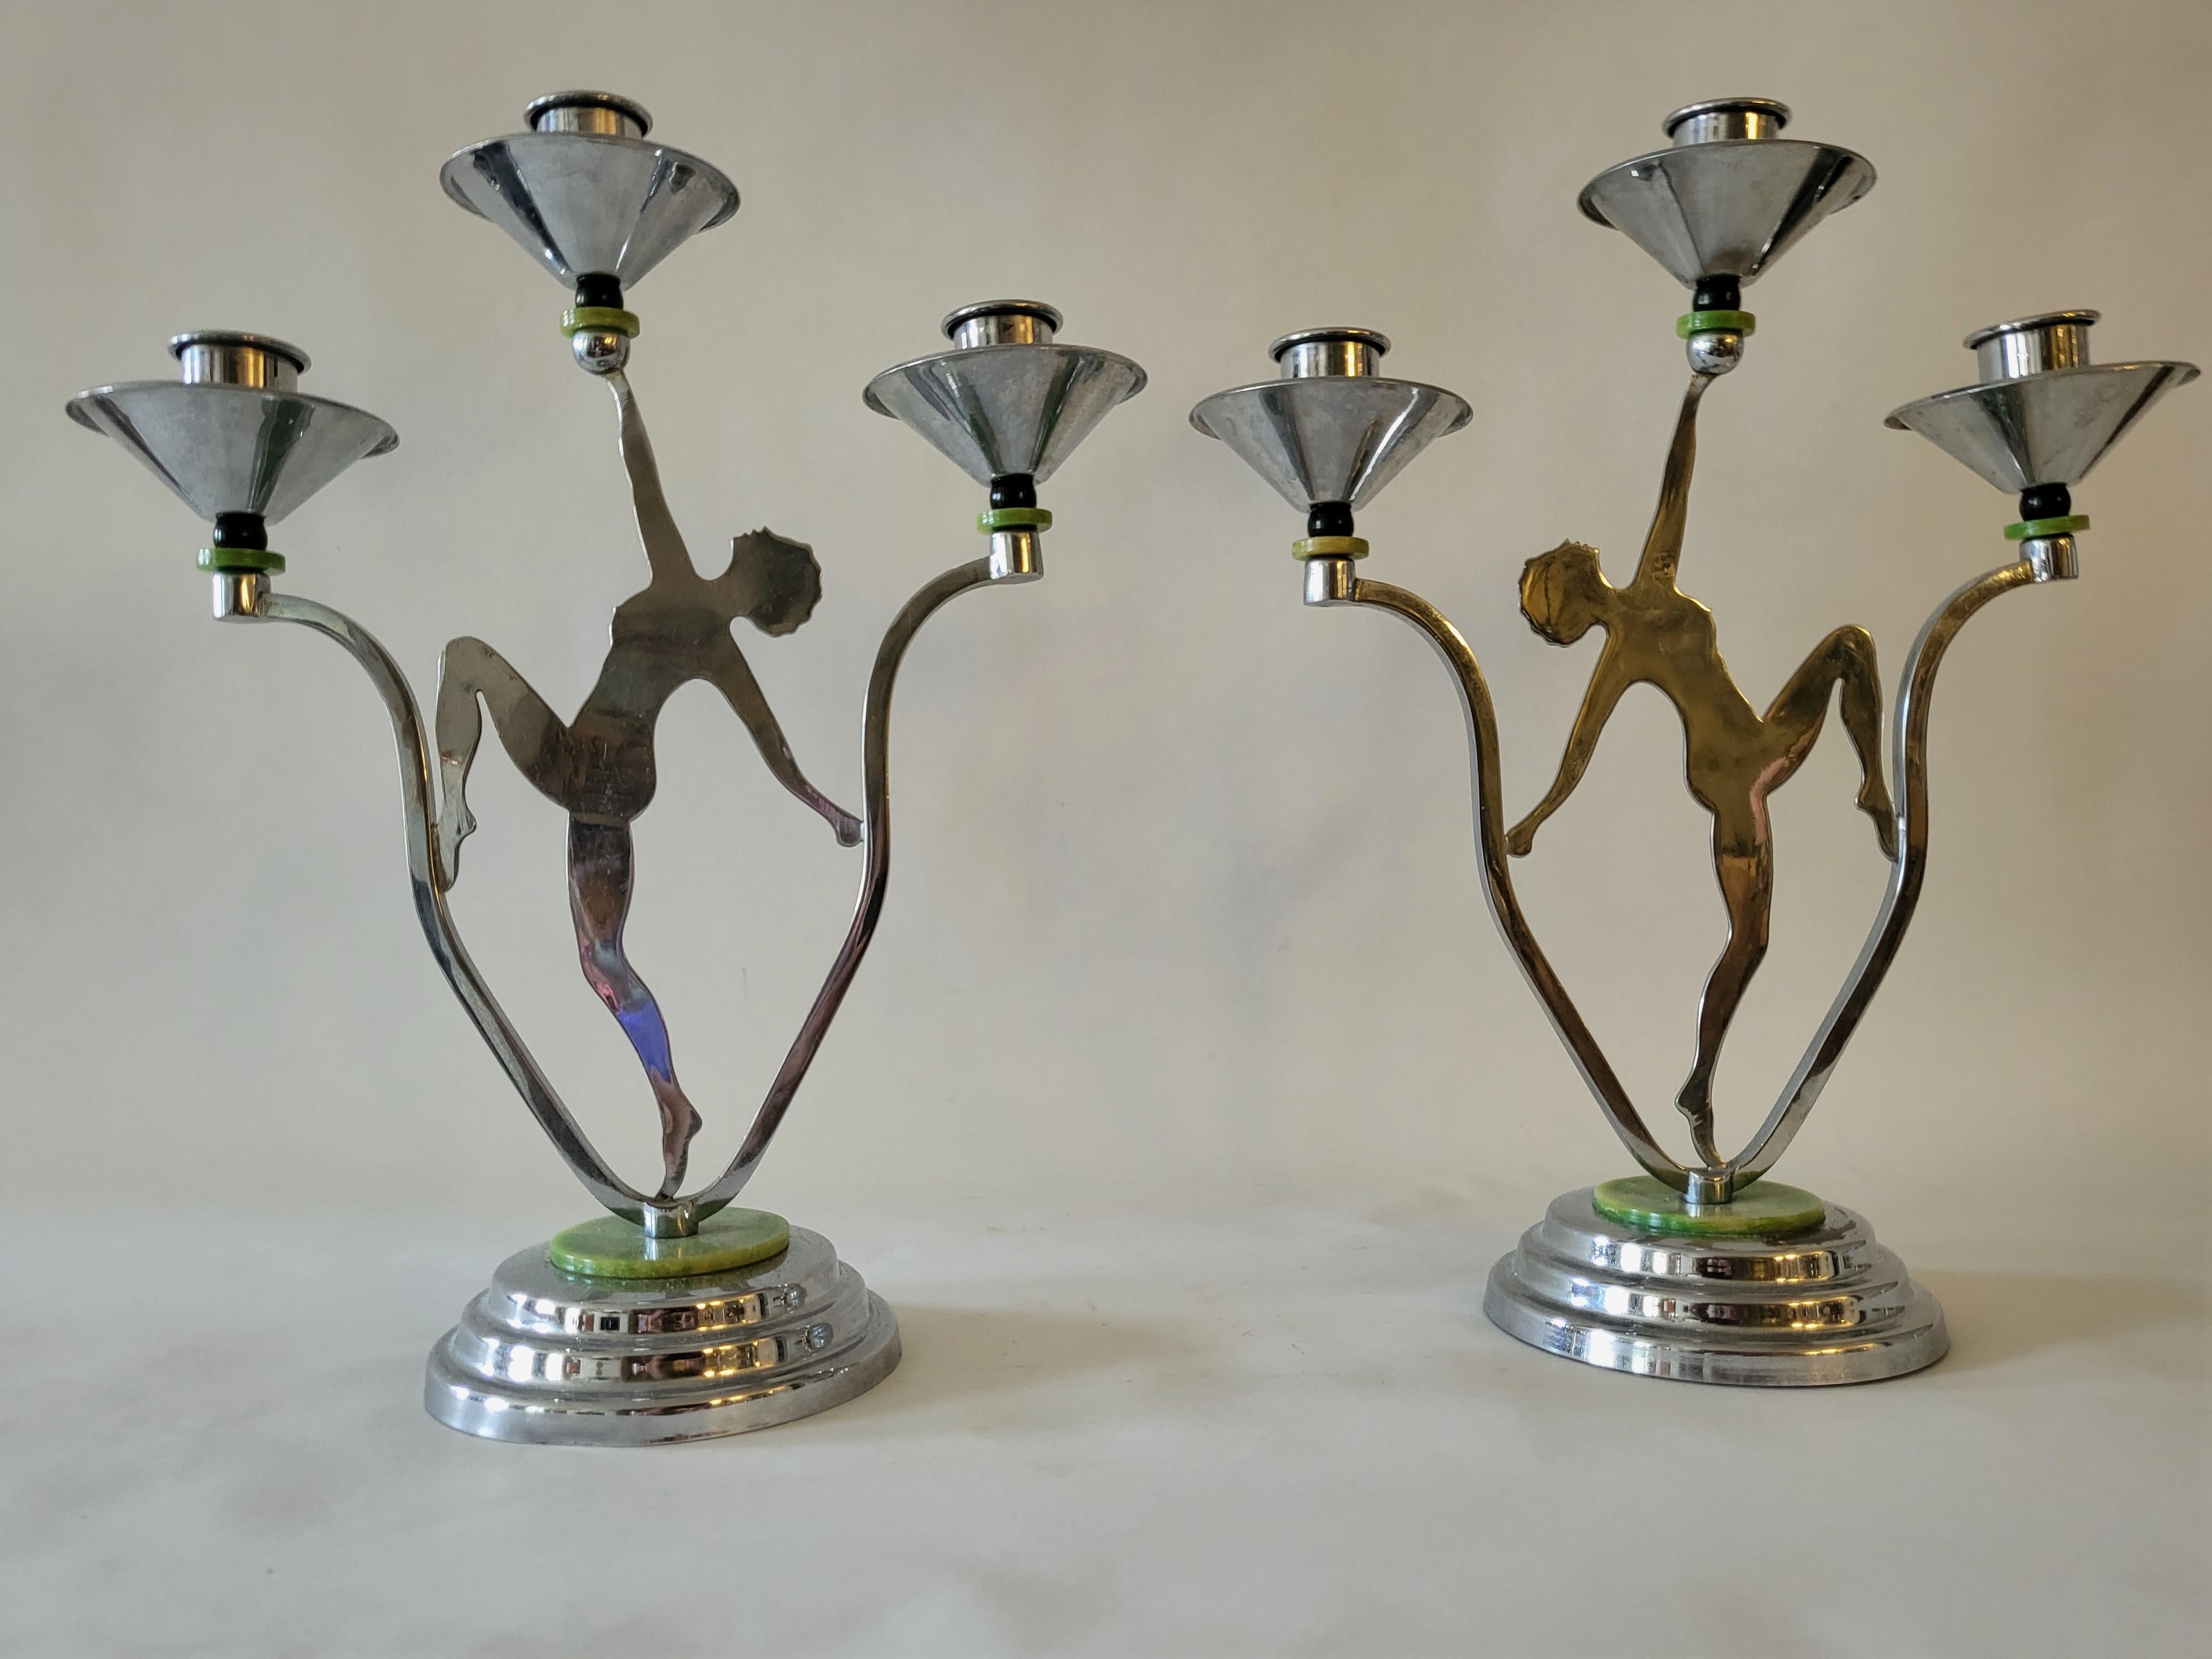 This rare pair of English Art Deco Chrome and Bakelite triple candle holders each feature a silhouette of a nude female holding aloft a marbled green Bakelite disk that supports a black Bakeite bead topped with a chrome candle socket and bobeche.